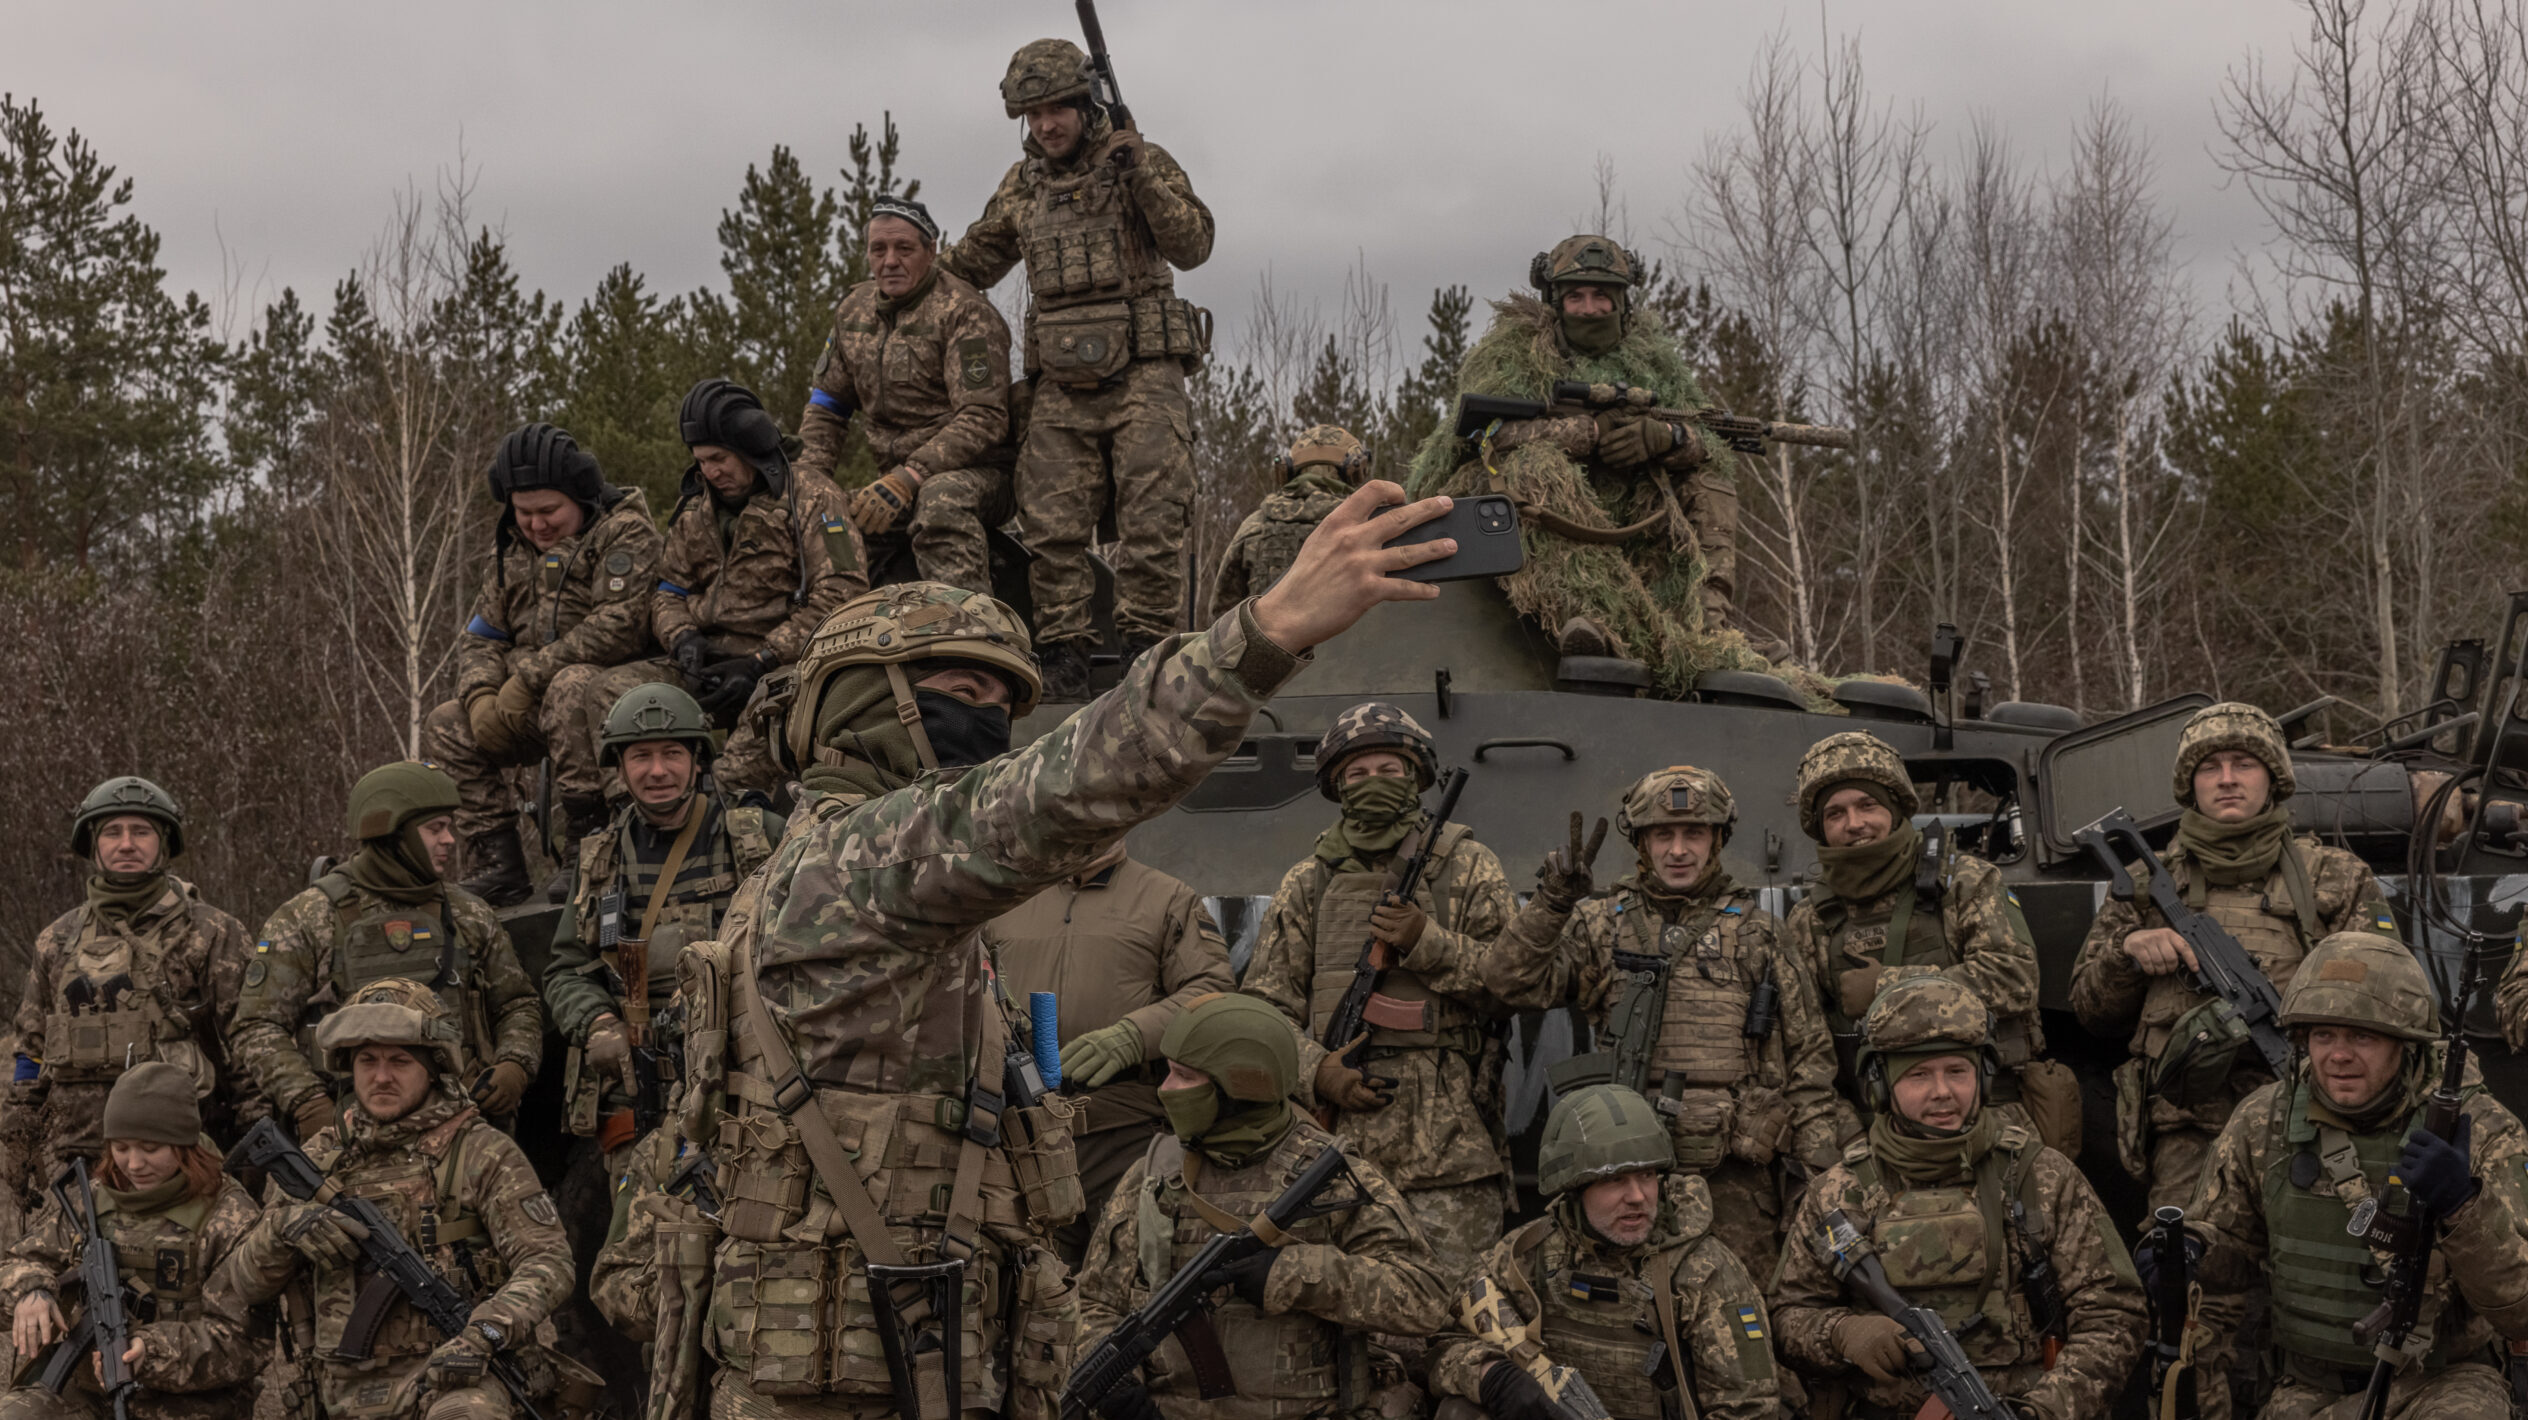 Ukraine has entered the top twenty most powerful armies in the world, according to Global Firepower